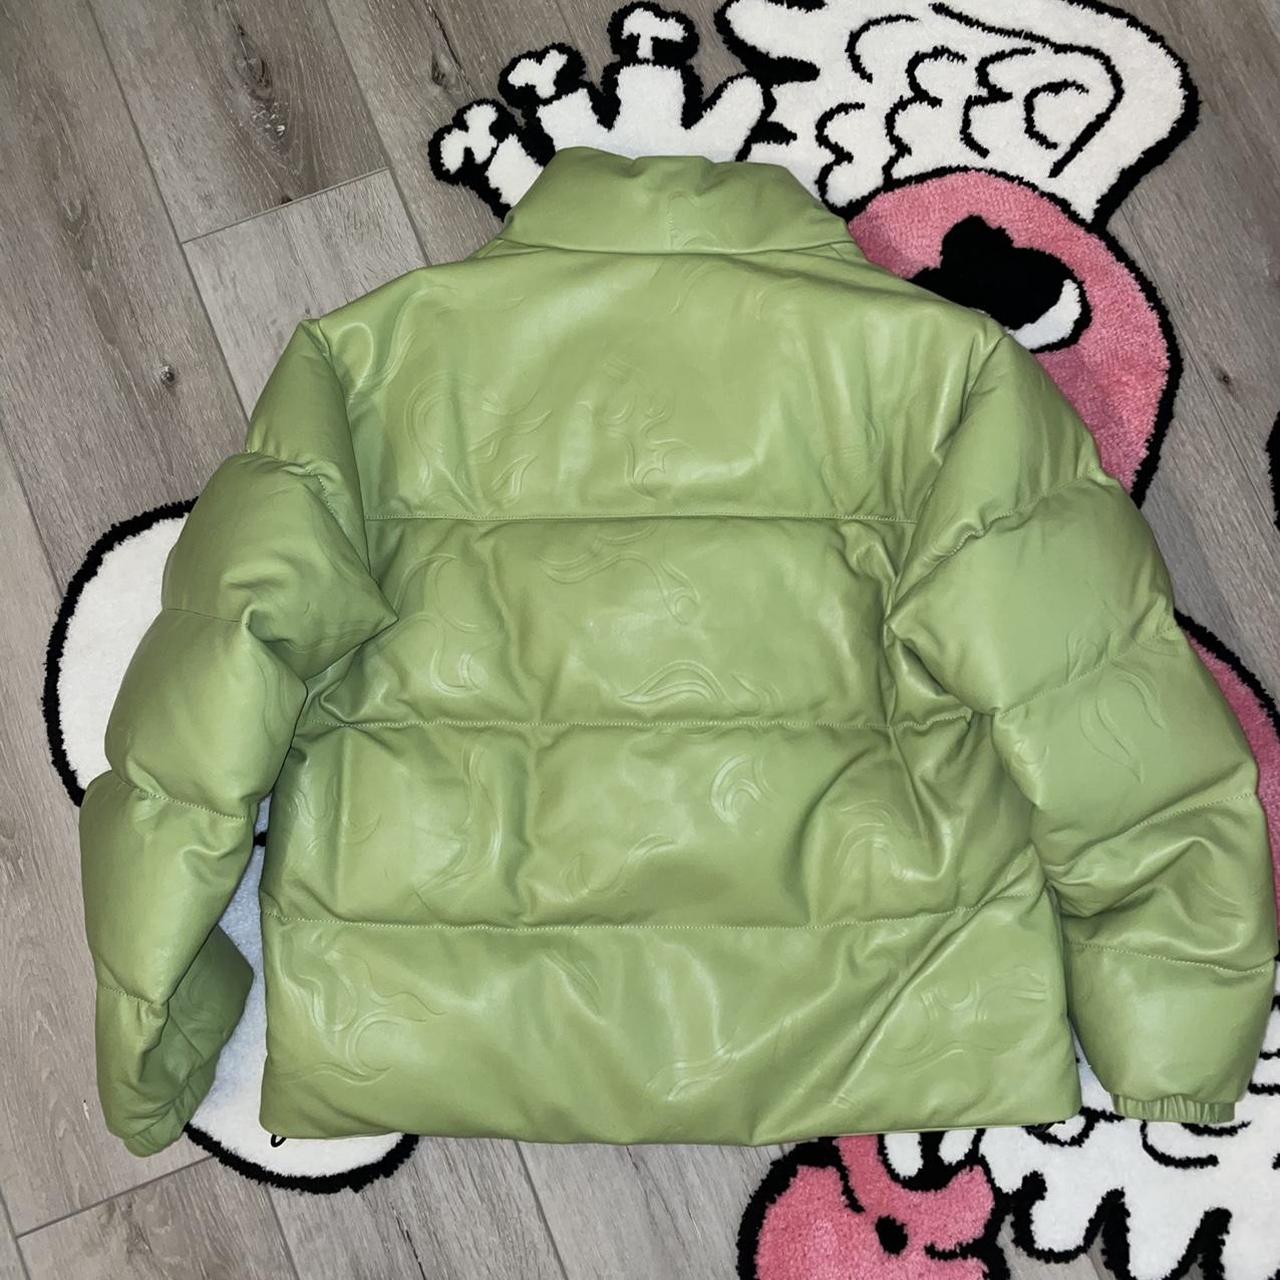 GOLF WANG LEATHER FLAME PUFFY JACKET